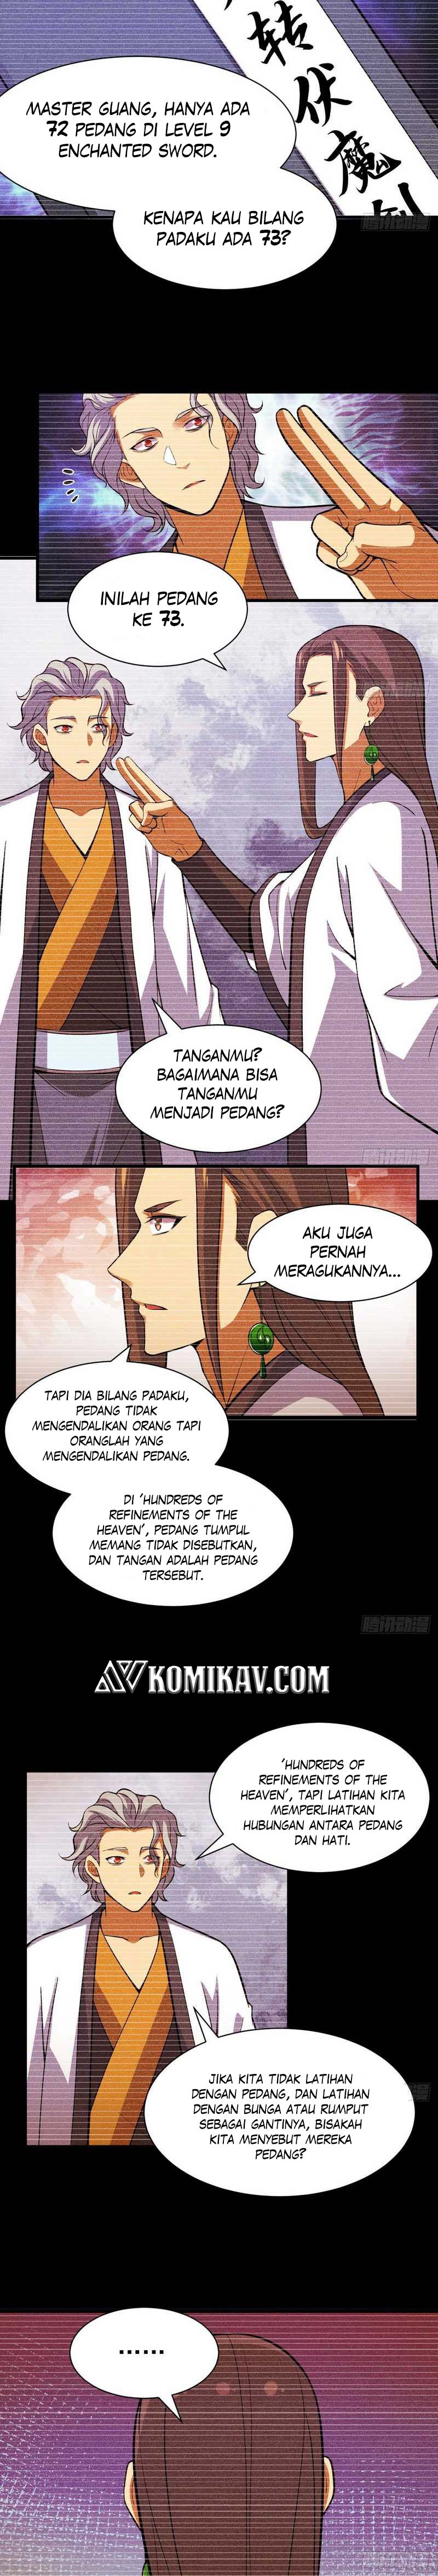 Dilarang COPAS - situs resmi www.mangacanblog.com - Komik i just want to be beaten to death by everyone 085 - chapter 85 86 Indonesia i just want to be beaten to death by everyone 085 - chapter 85 Terbaru 6|Baca Manga Komik Indonesia|Mangacan